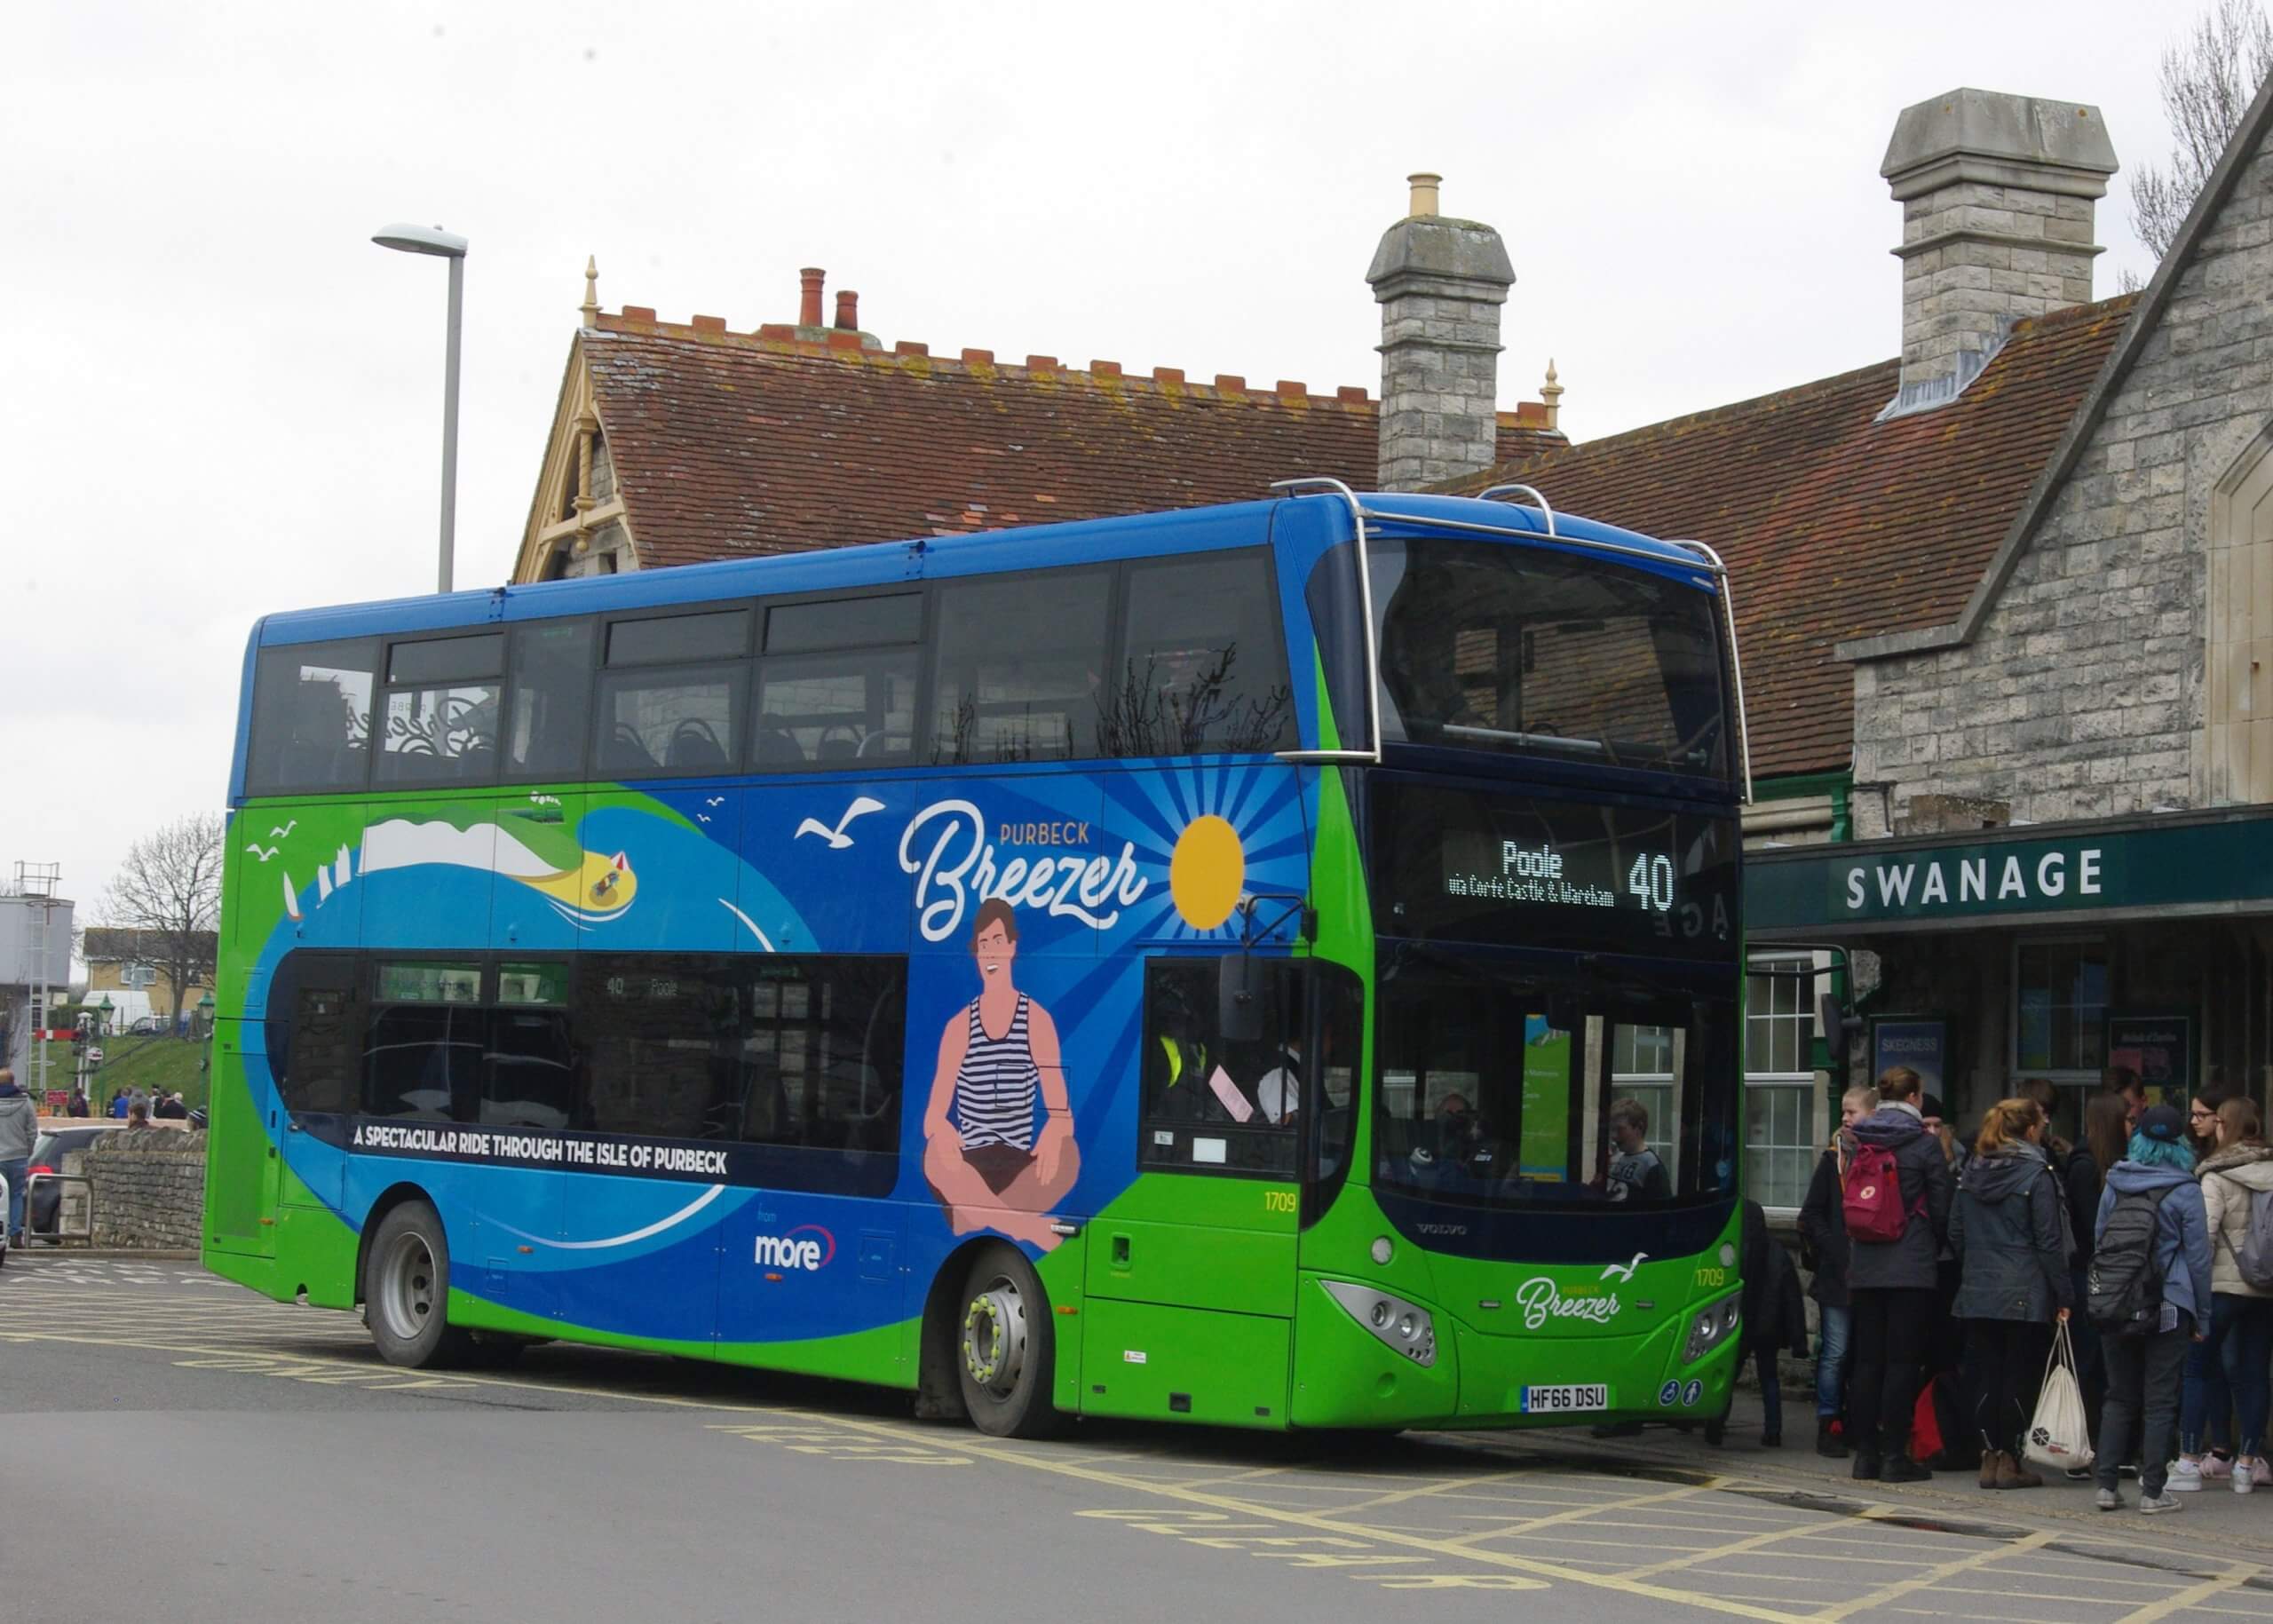 Purbeck Breezer bus outside Swanage station